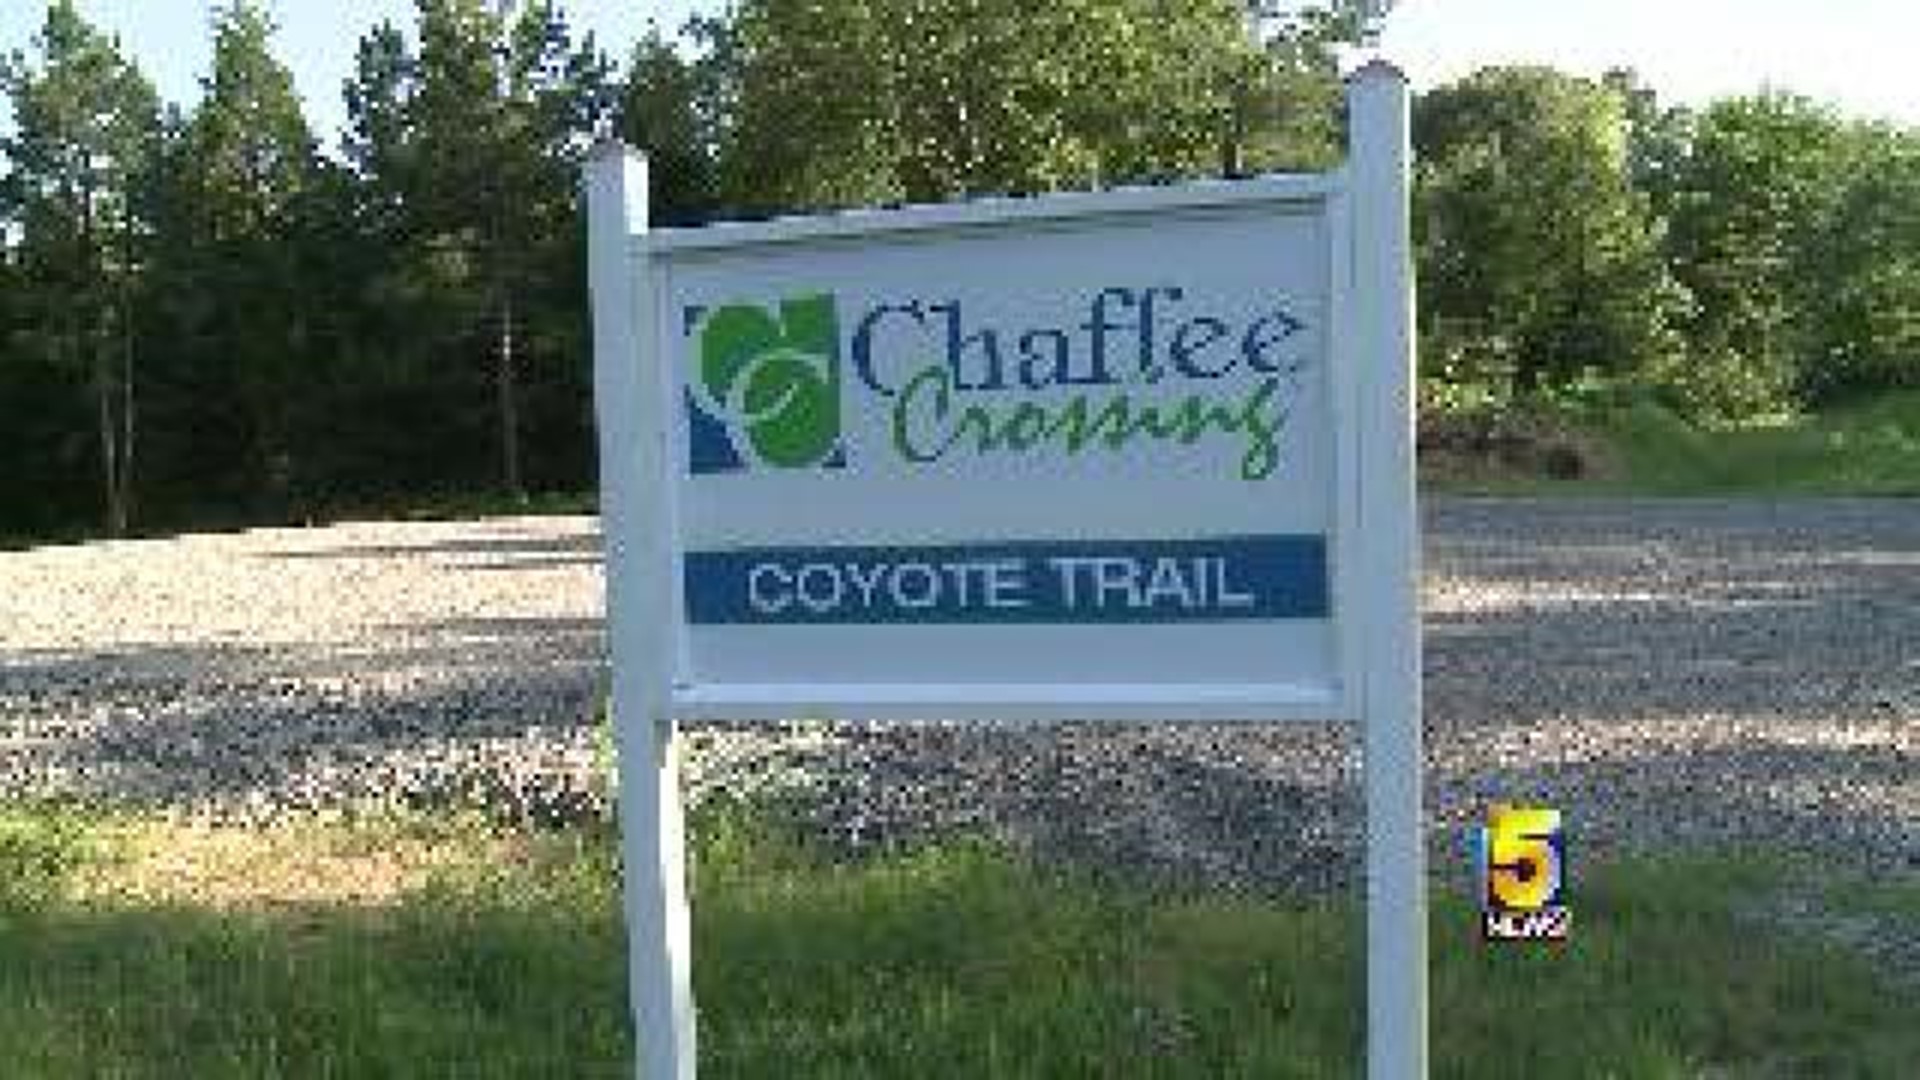 Coyote Trail Opens at Chaffee Crossing